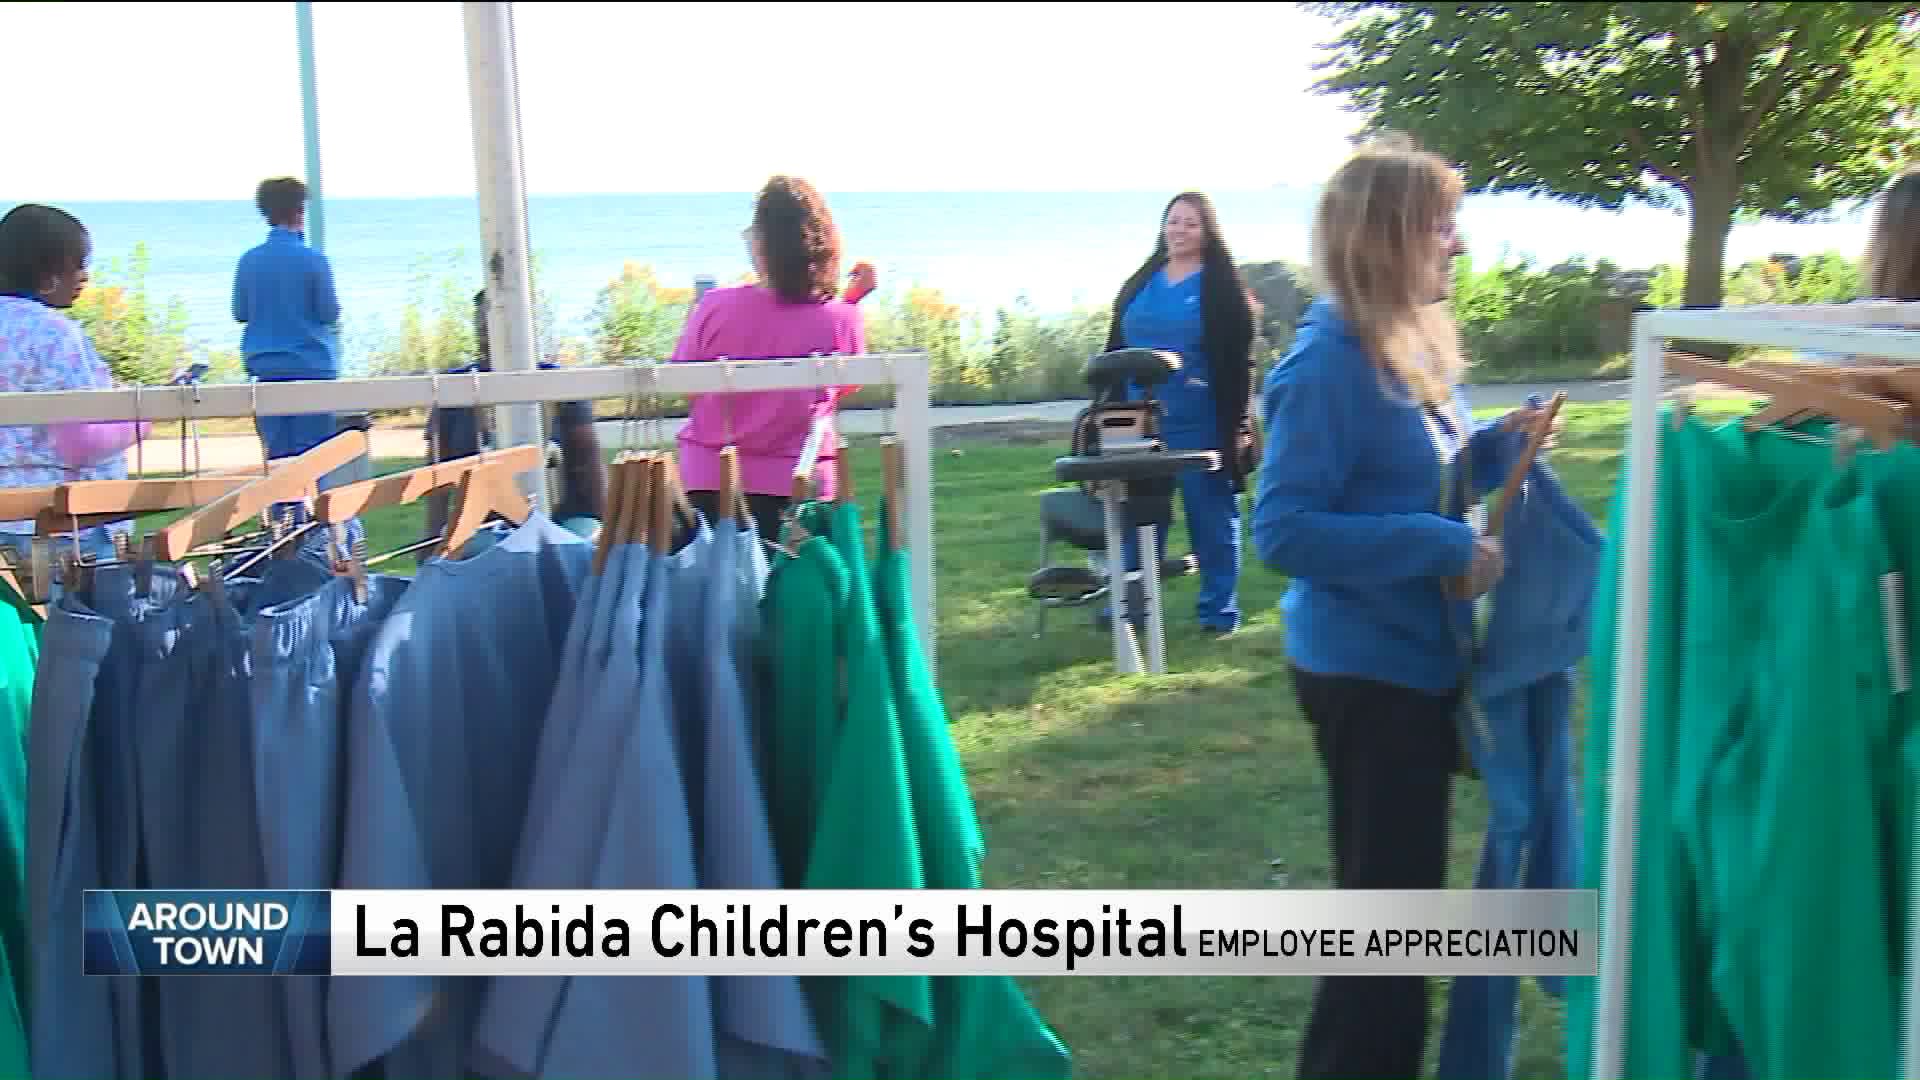 Around Town goes to La Rabida Children’s Hospital for an employee appreciation event